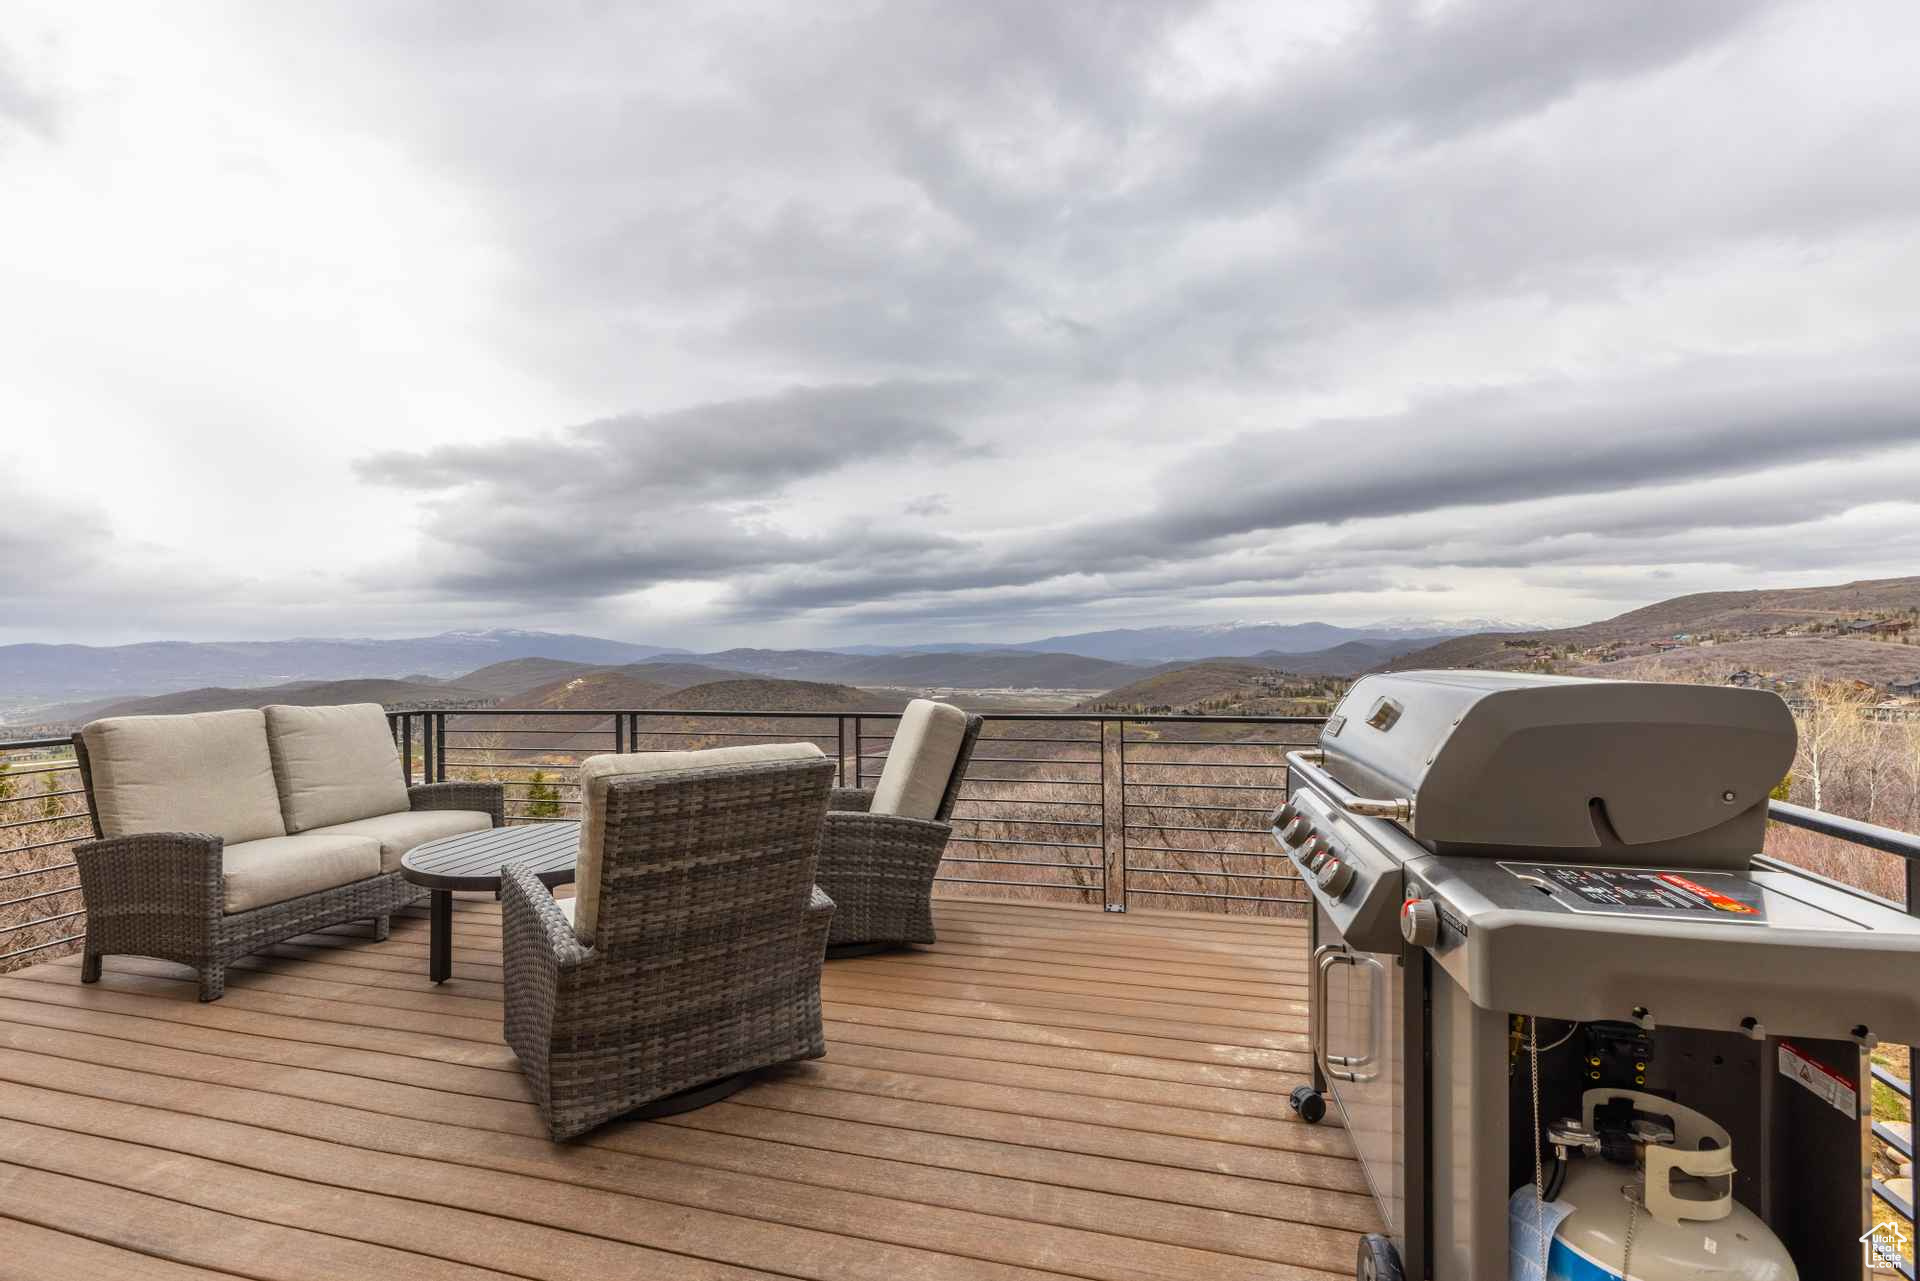 Deck with grilling area, outdoor lounge area, and a mountain view